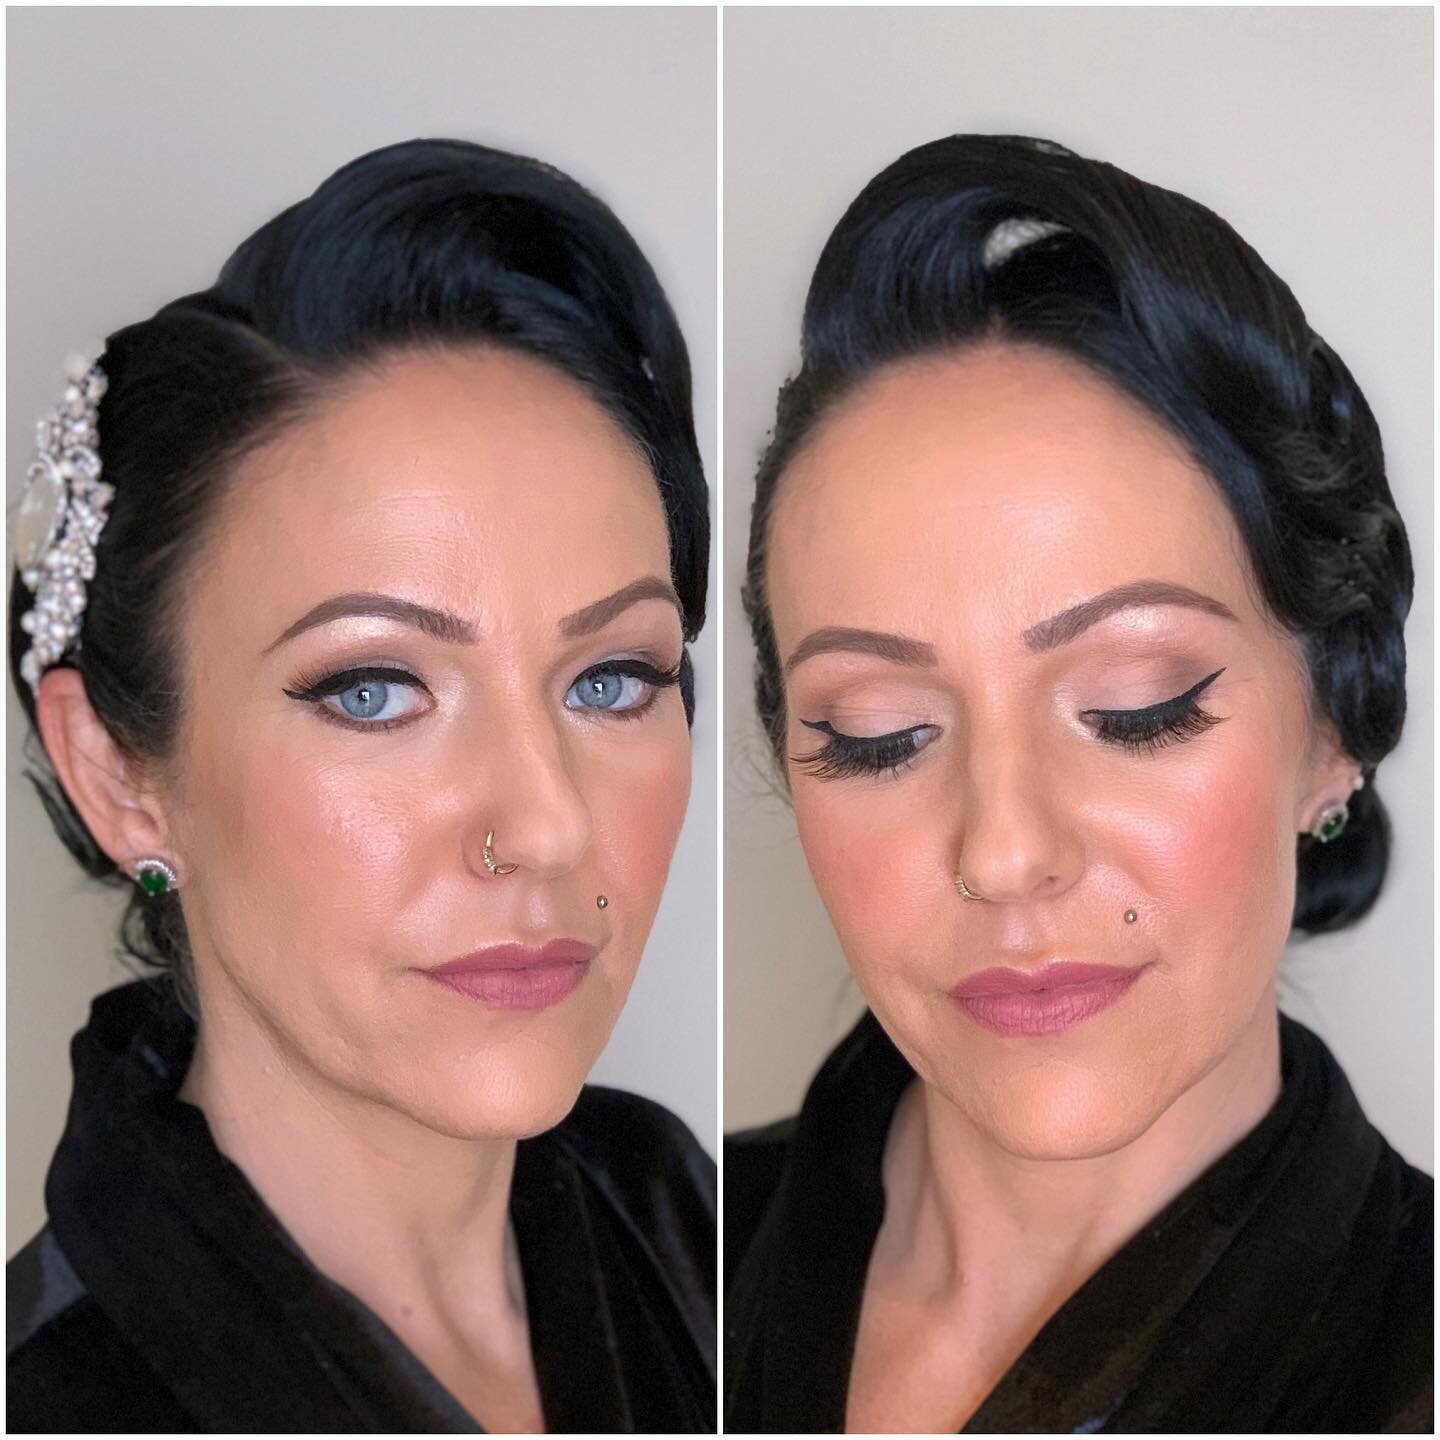 Channeling #oldhollywood glam. That wing tho!
.
Vendor love:
Makeup: Alexa Rae for @artistrybyalexa
Hair: Sofia Pastro for @artistrybyalexa
.
@hattieroot
@lavishengagements
@bespokeblossoms
@villaeyrie